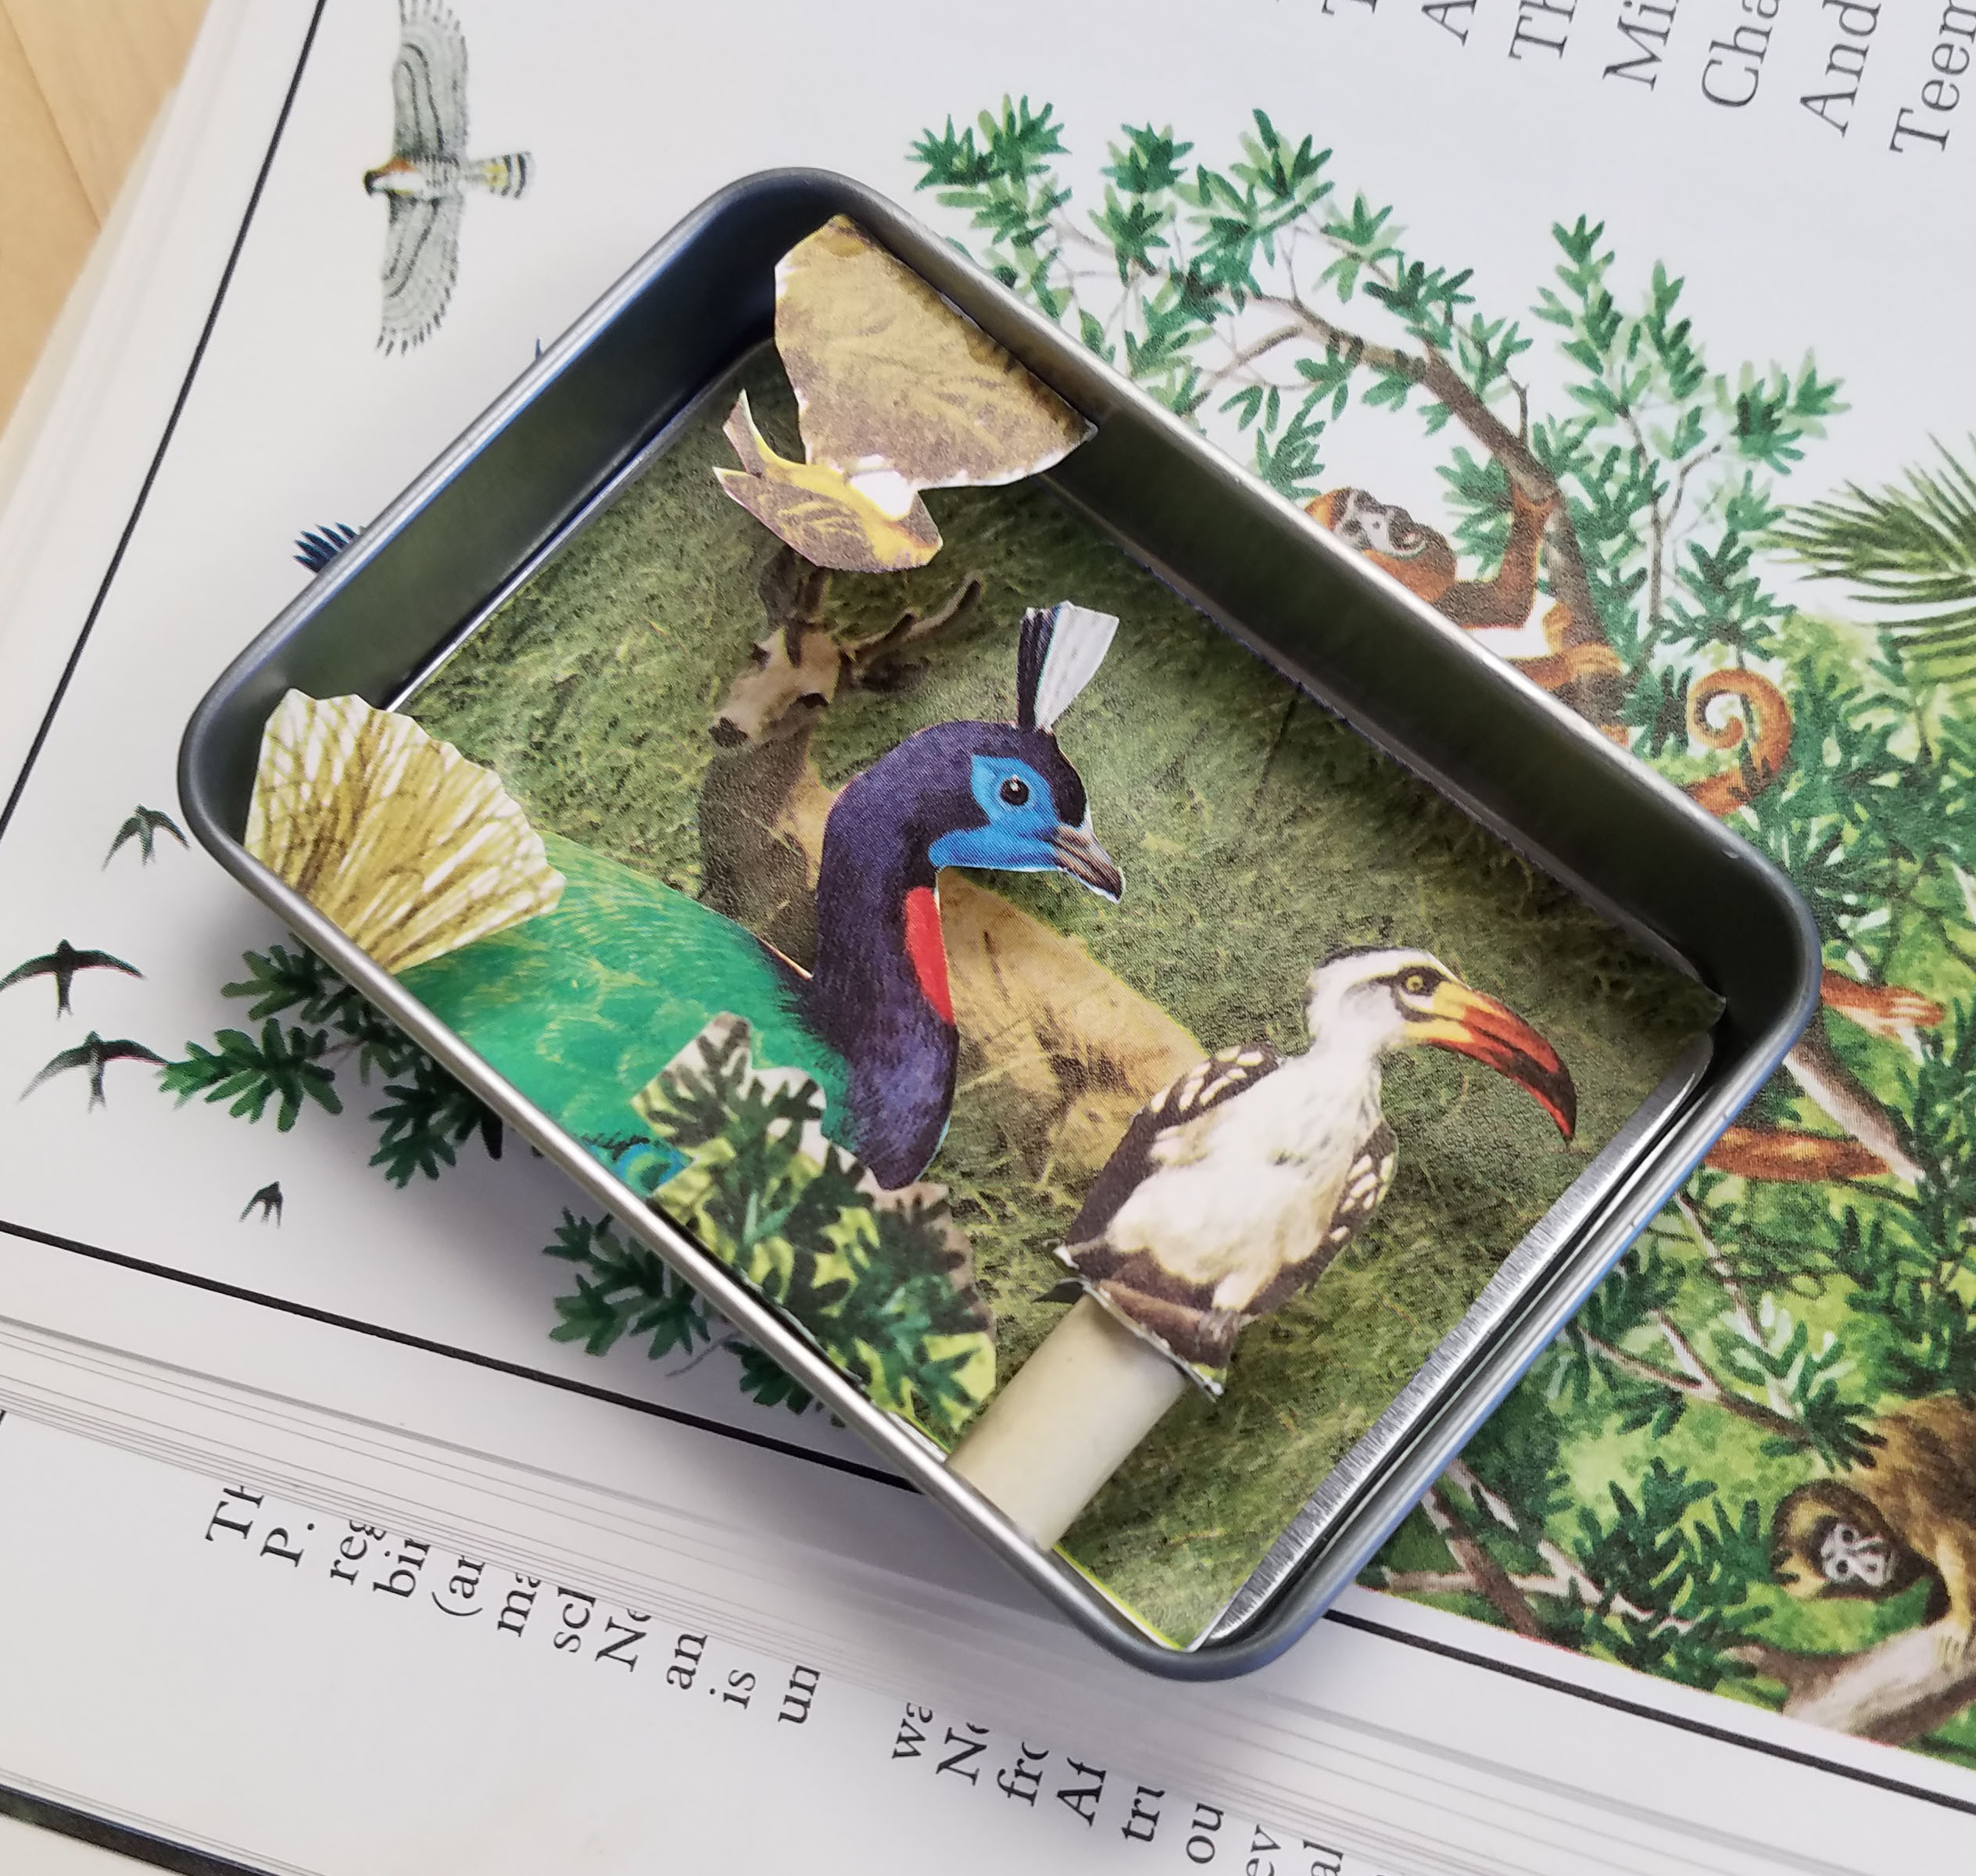 Paper collage of peacock and bird cutouts assembled inside a metal tin, placed on a nature book